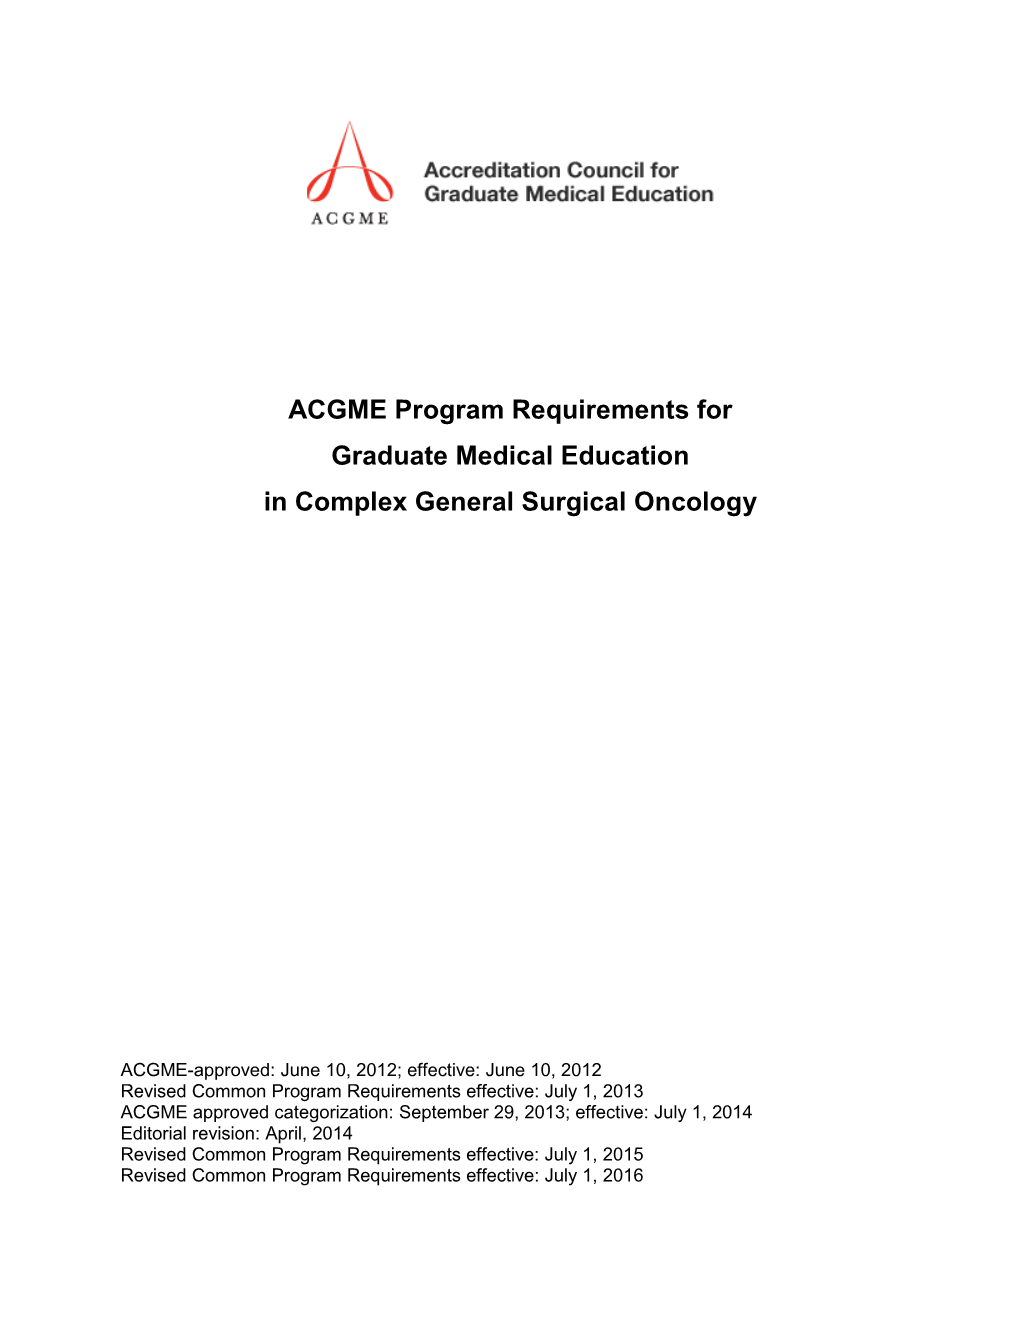 Program Requirements for GME in Complex General Surgical Oncology